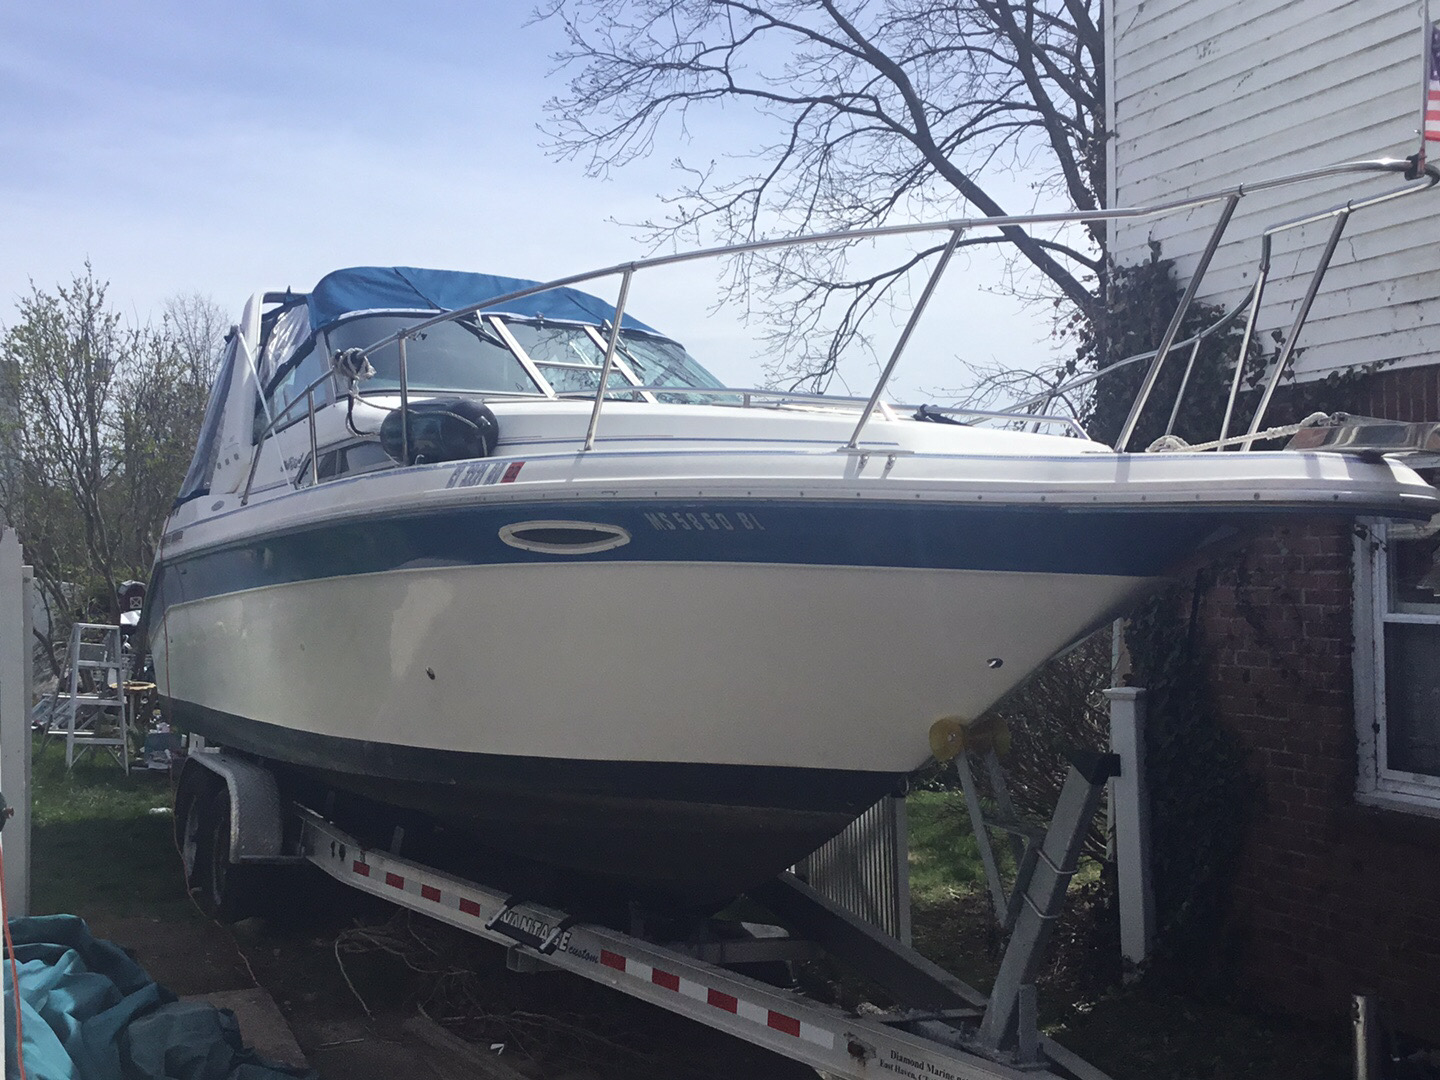 1993 30 foot Sea Ray Cabin CR Power boat for sale in New London, CT - image 2 